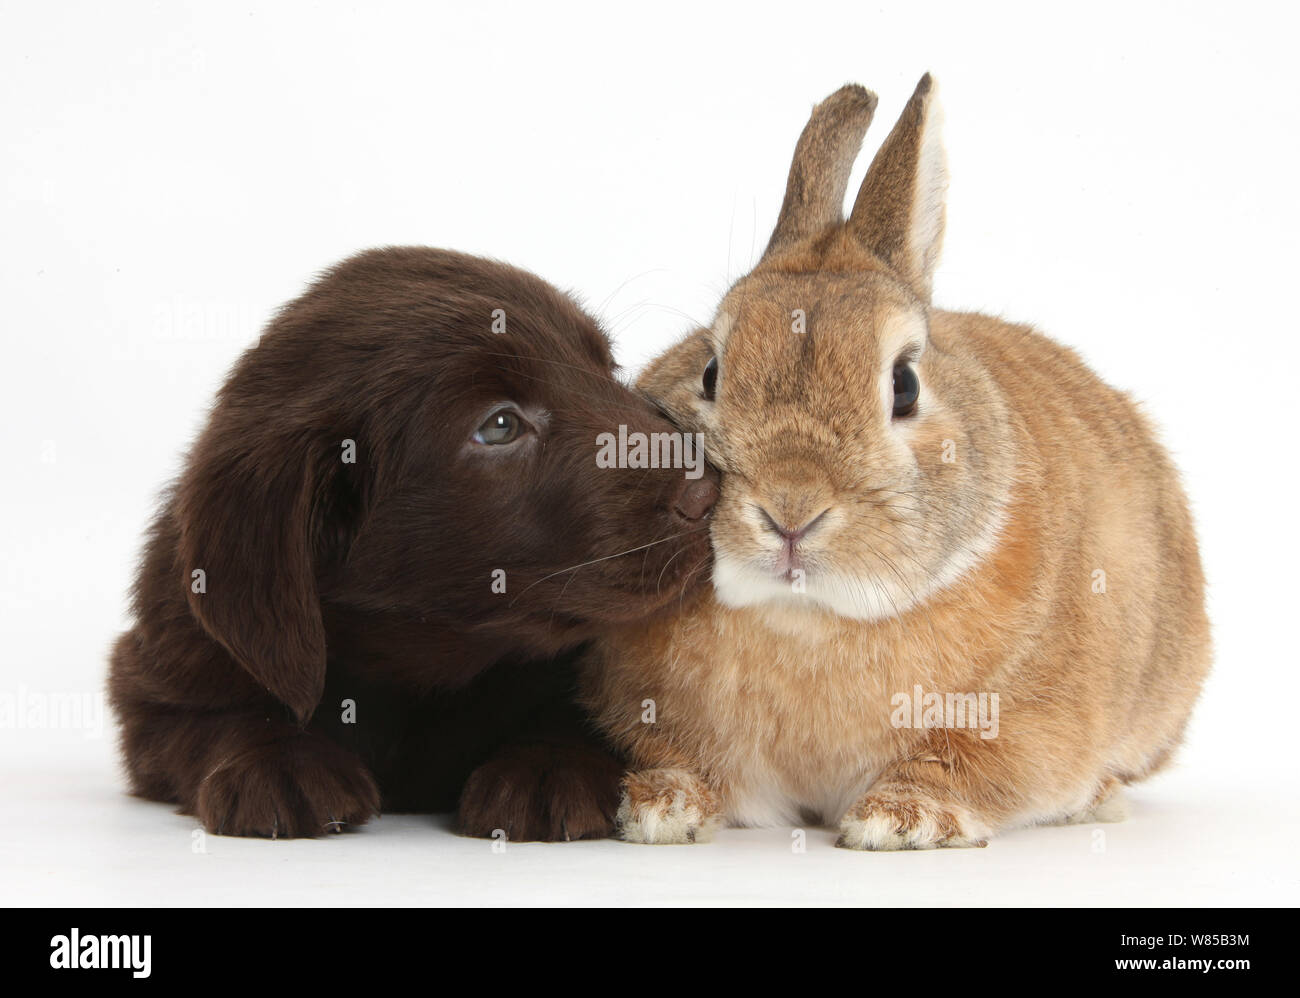 Liver Flatcoated Retriever puppy, 6 weeks, with Netherland Dwarf-cross rabbit, Peter. Stock Photo